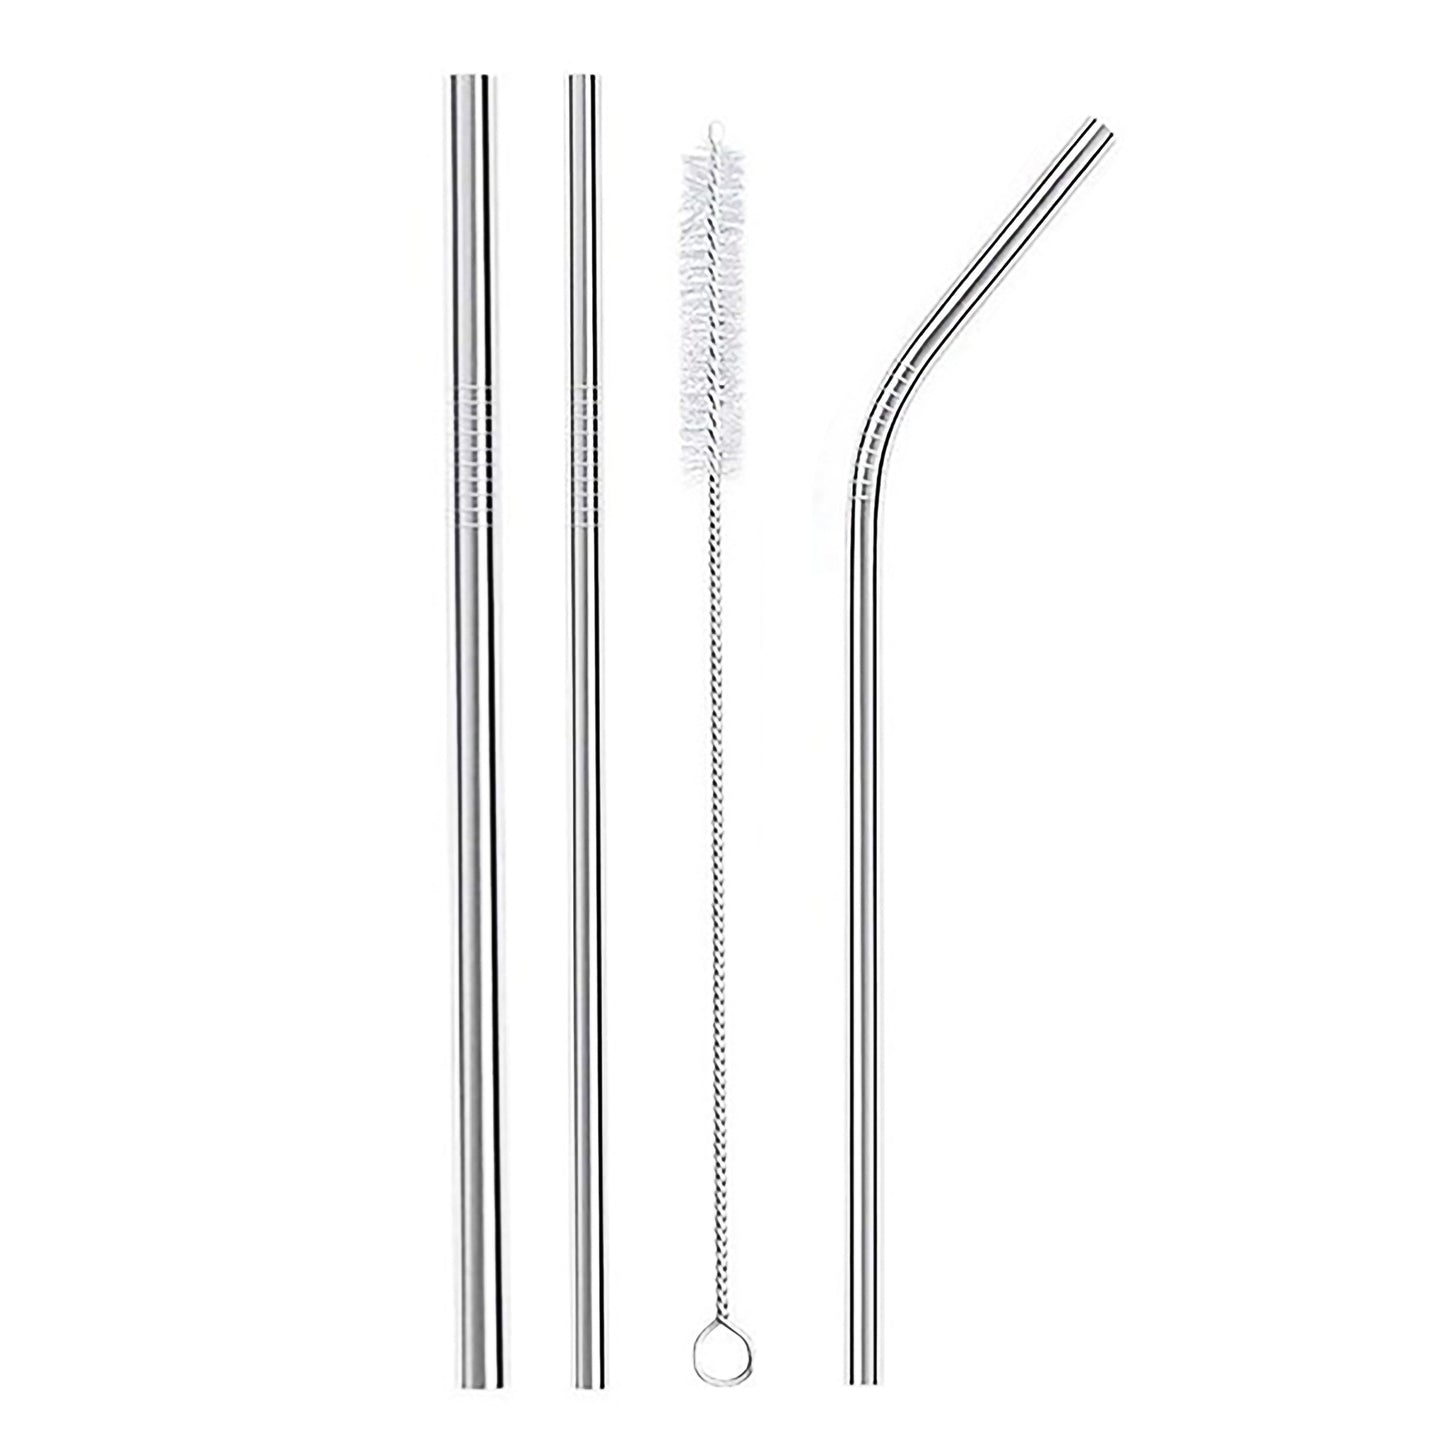 Meals In Steel Stainless Steel Smoothie Straw Pack with Vegan Brush - LunchBox Inc.